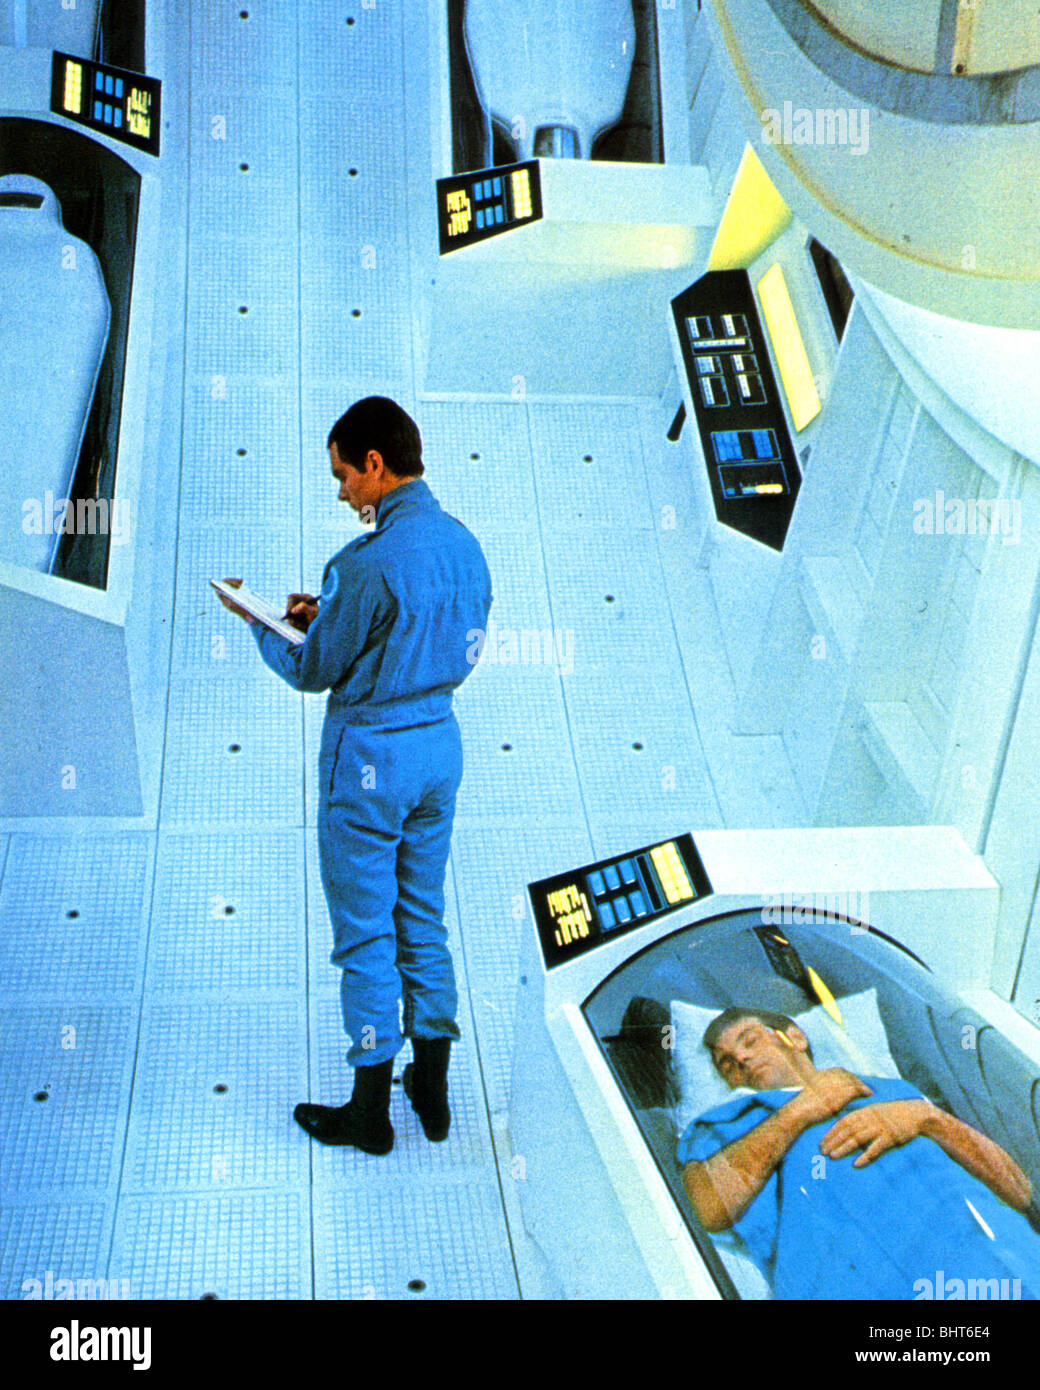 2001 : A SPACE ODYSSEY - 1968 MGM film directed by Stanley Kubrick Stock Photo